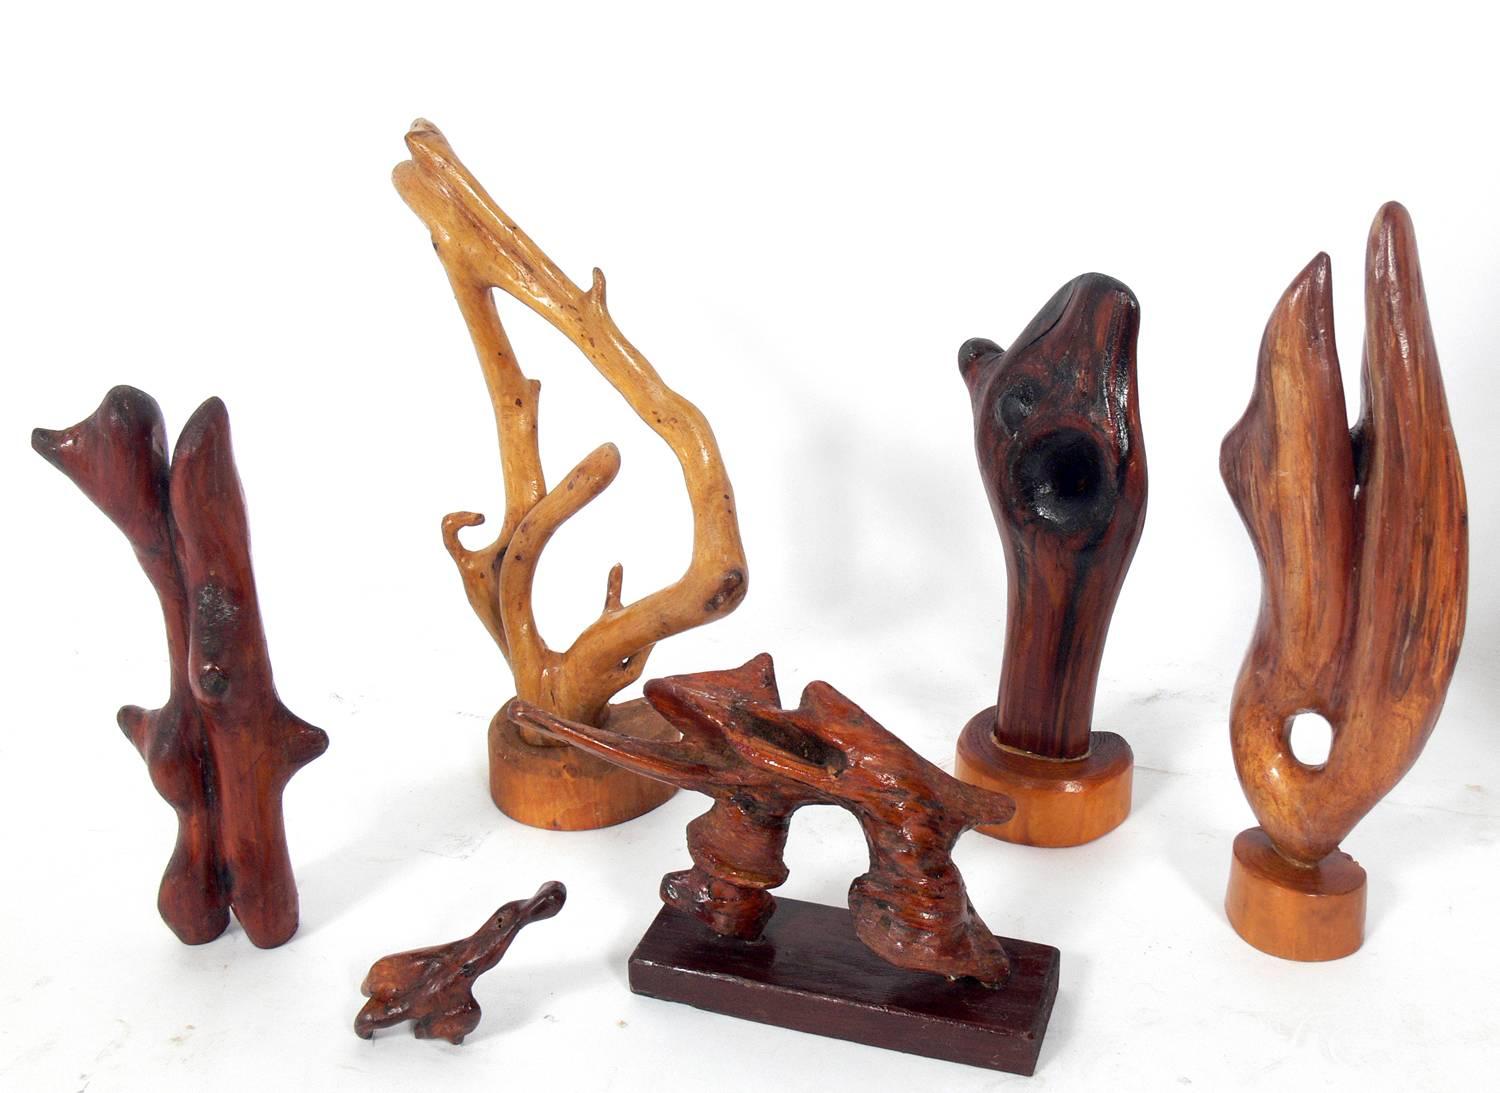 Collection of sculptural wood roots, probably Asian, circa 1960s. The largest sculpture measures 16